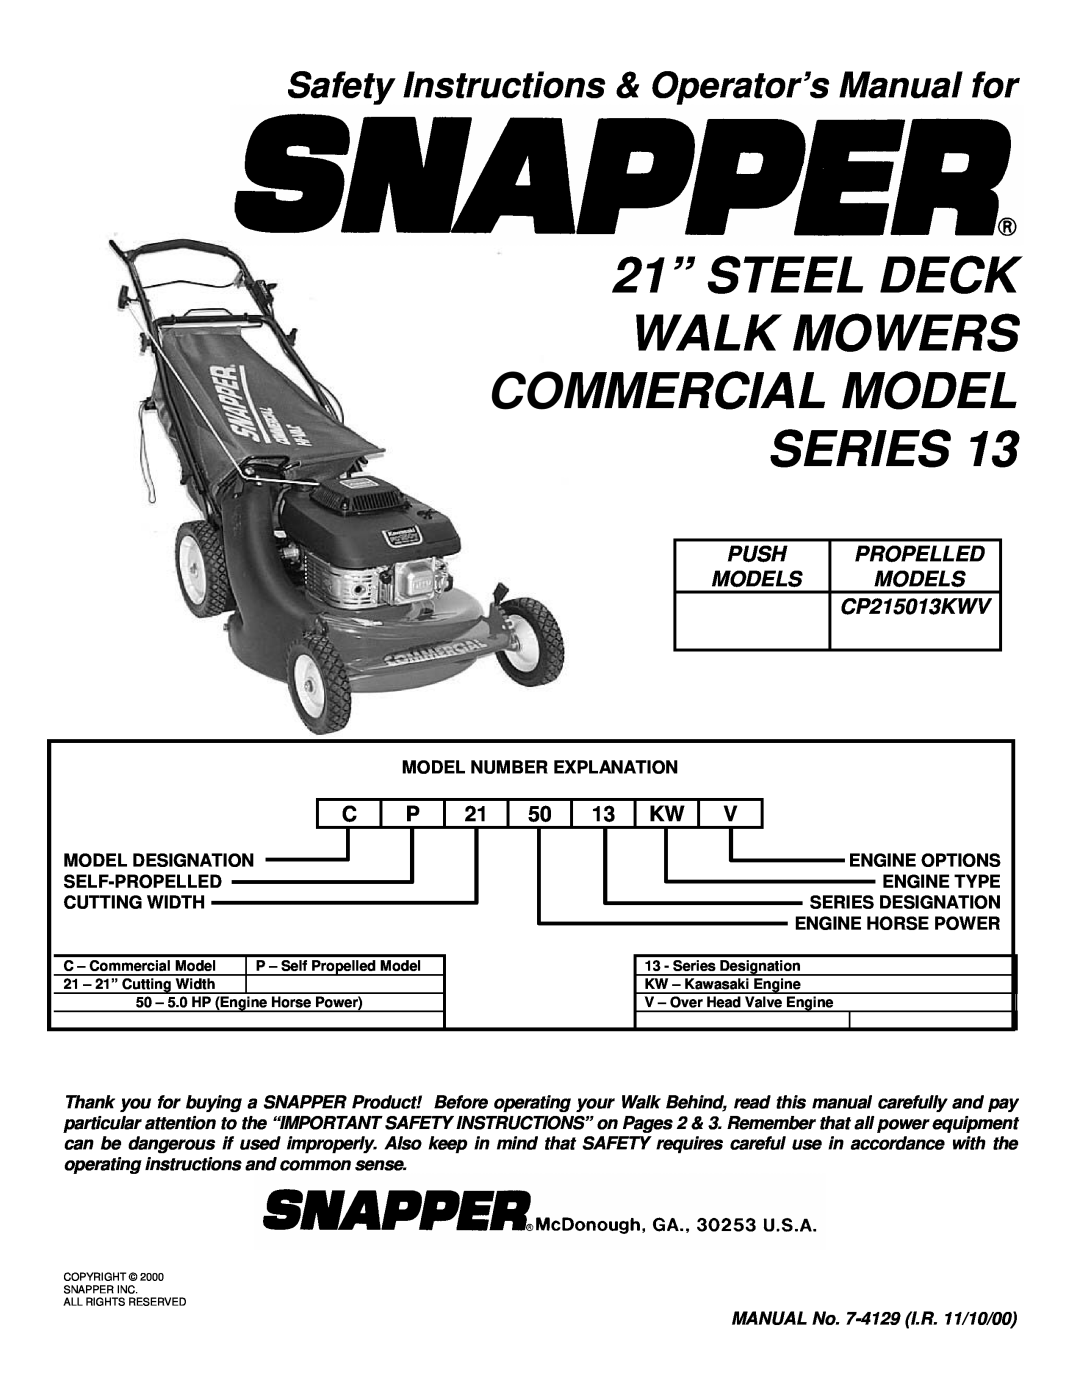 Snapper CP216512RV important safety instructions 21” STEEL DECK WALK MOWERS COMMERCIAL MODEL SERIES, Push, Propelled 